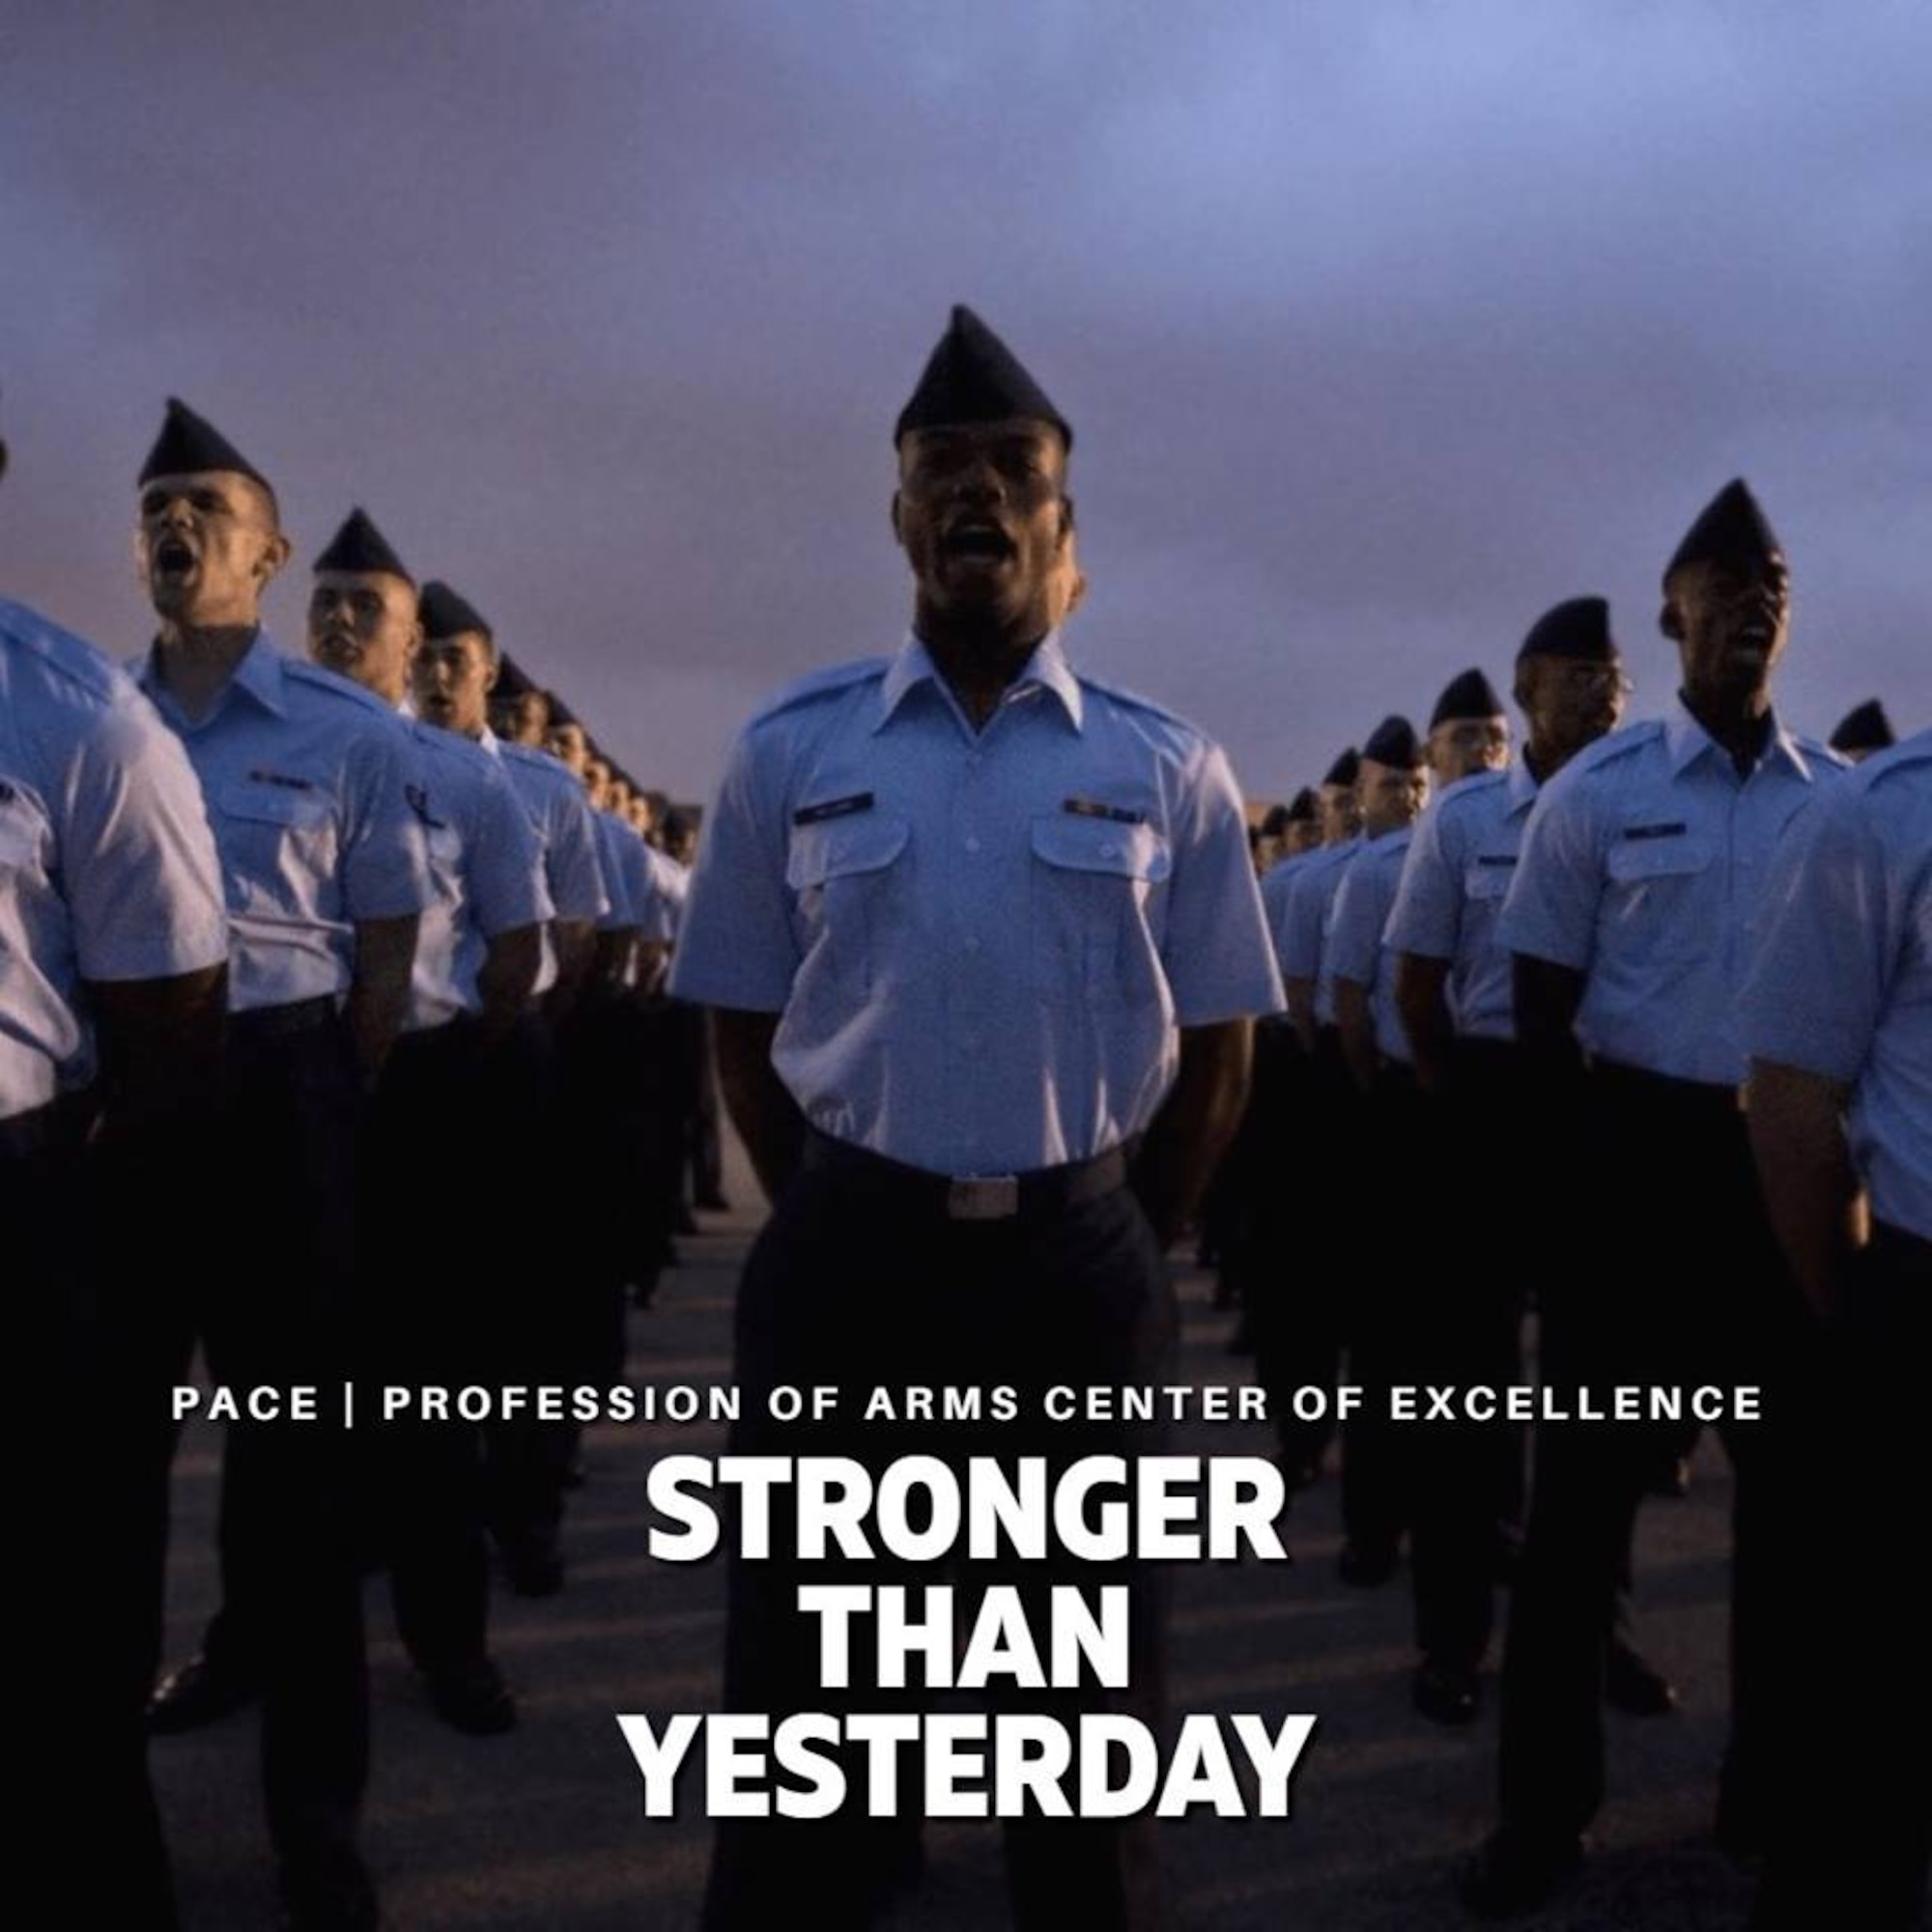 Quote of the Day: "Stronger than Yesterday"